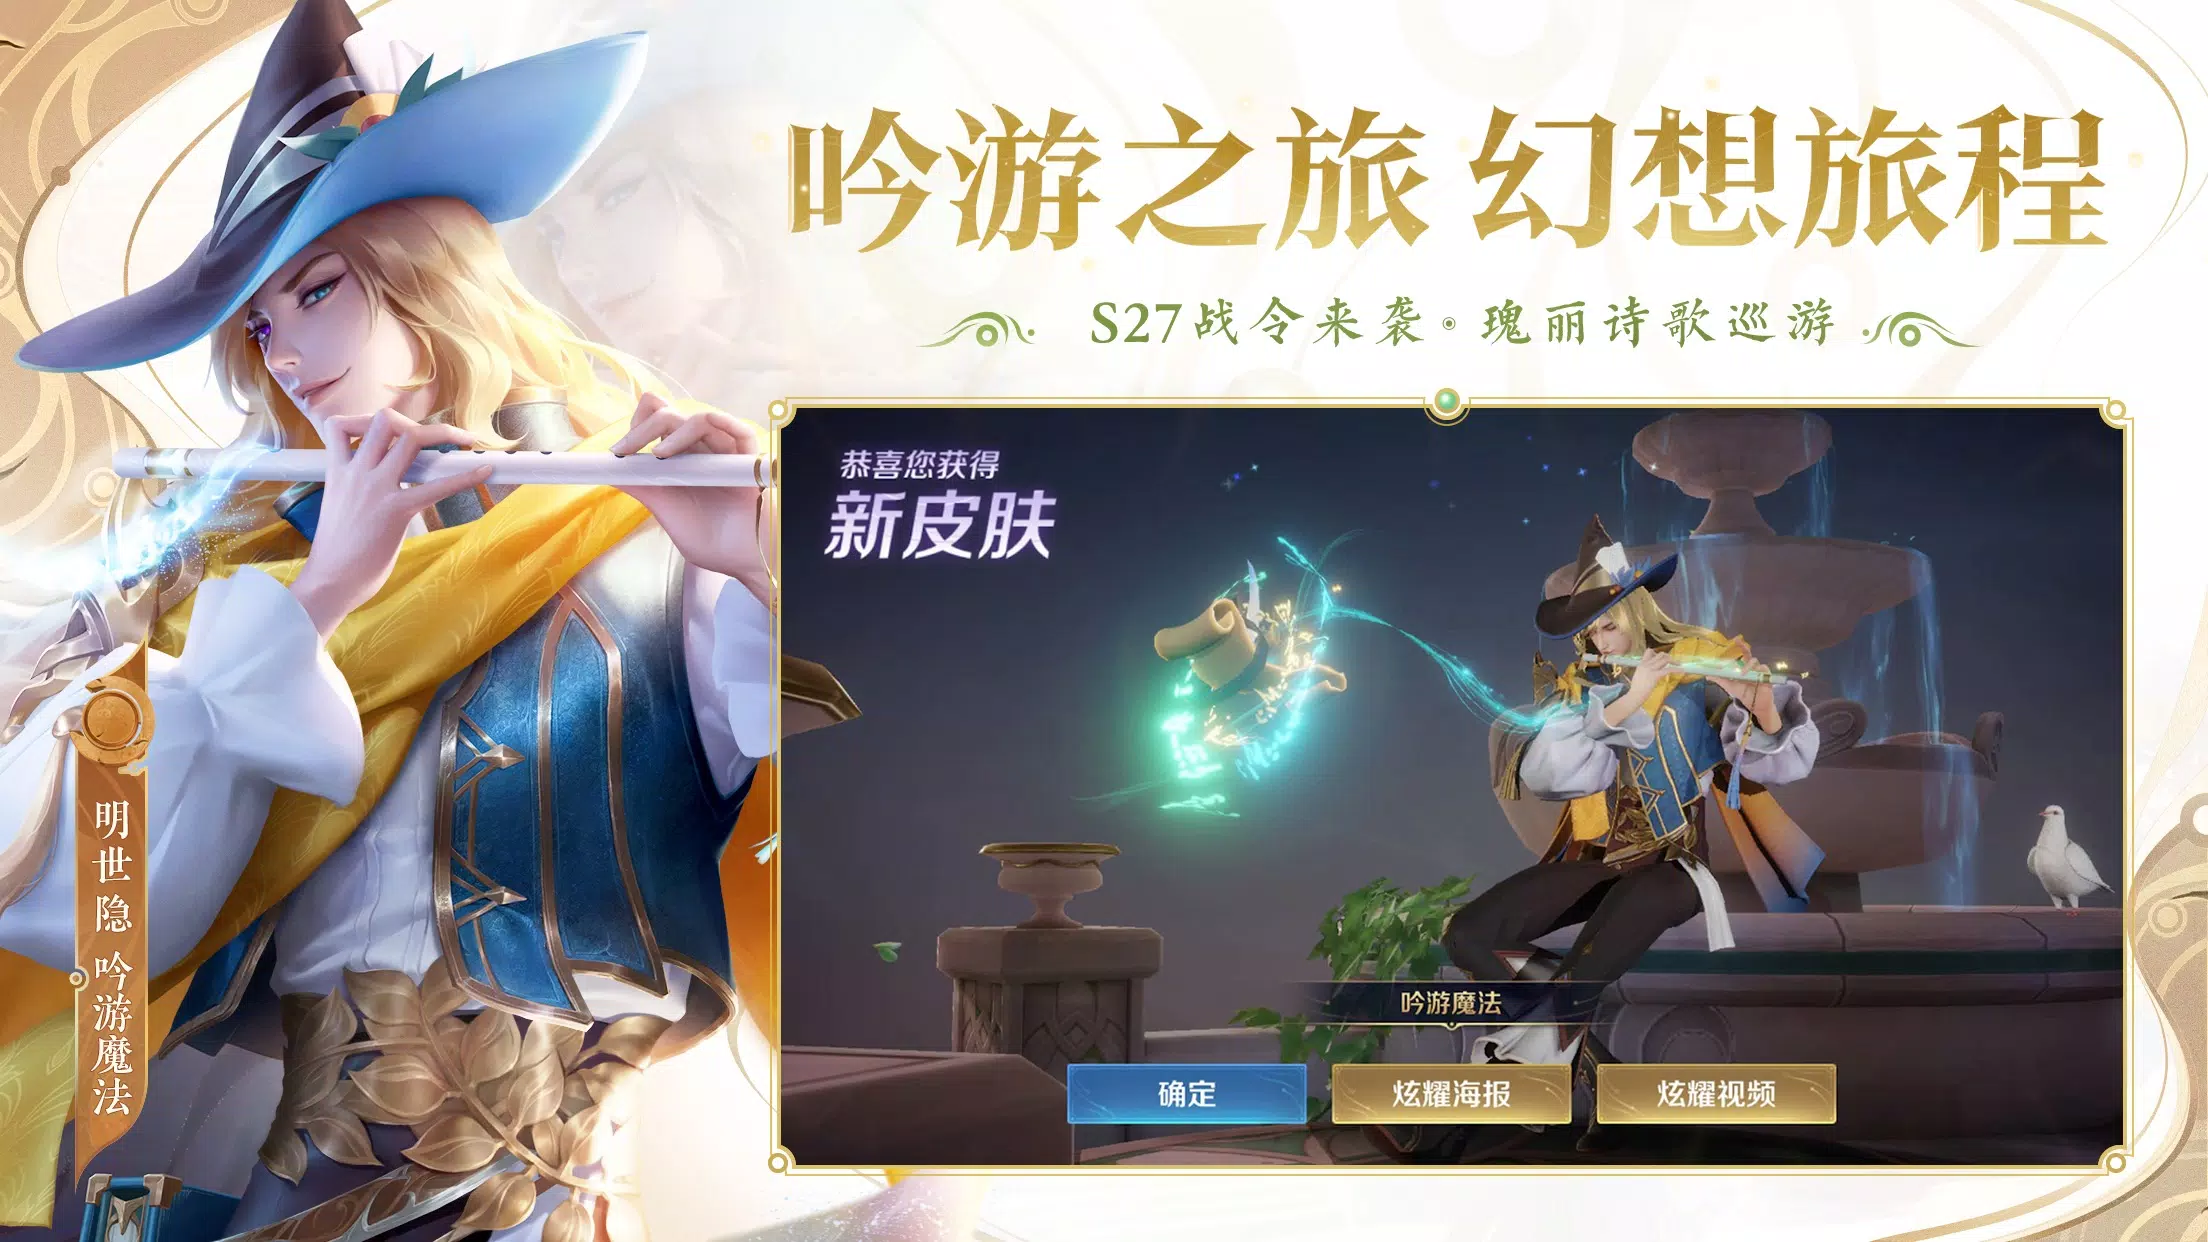 Honor of Kings APK for Android Download